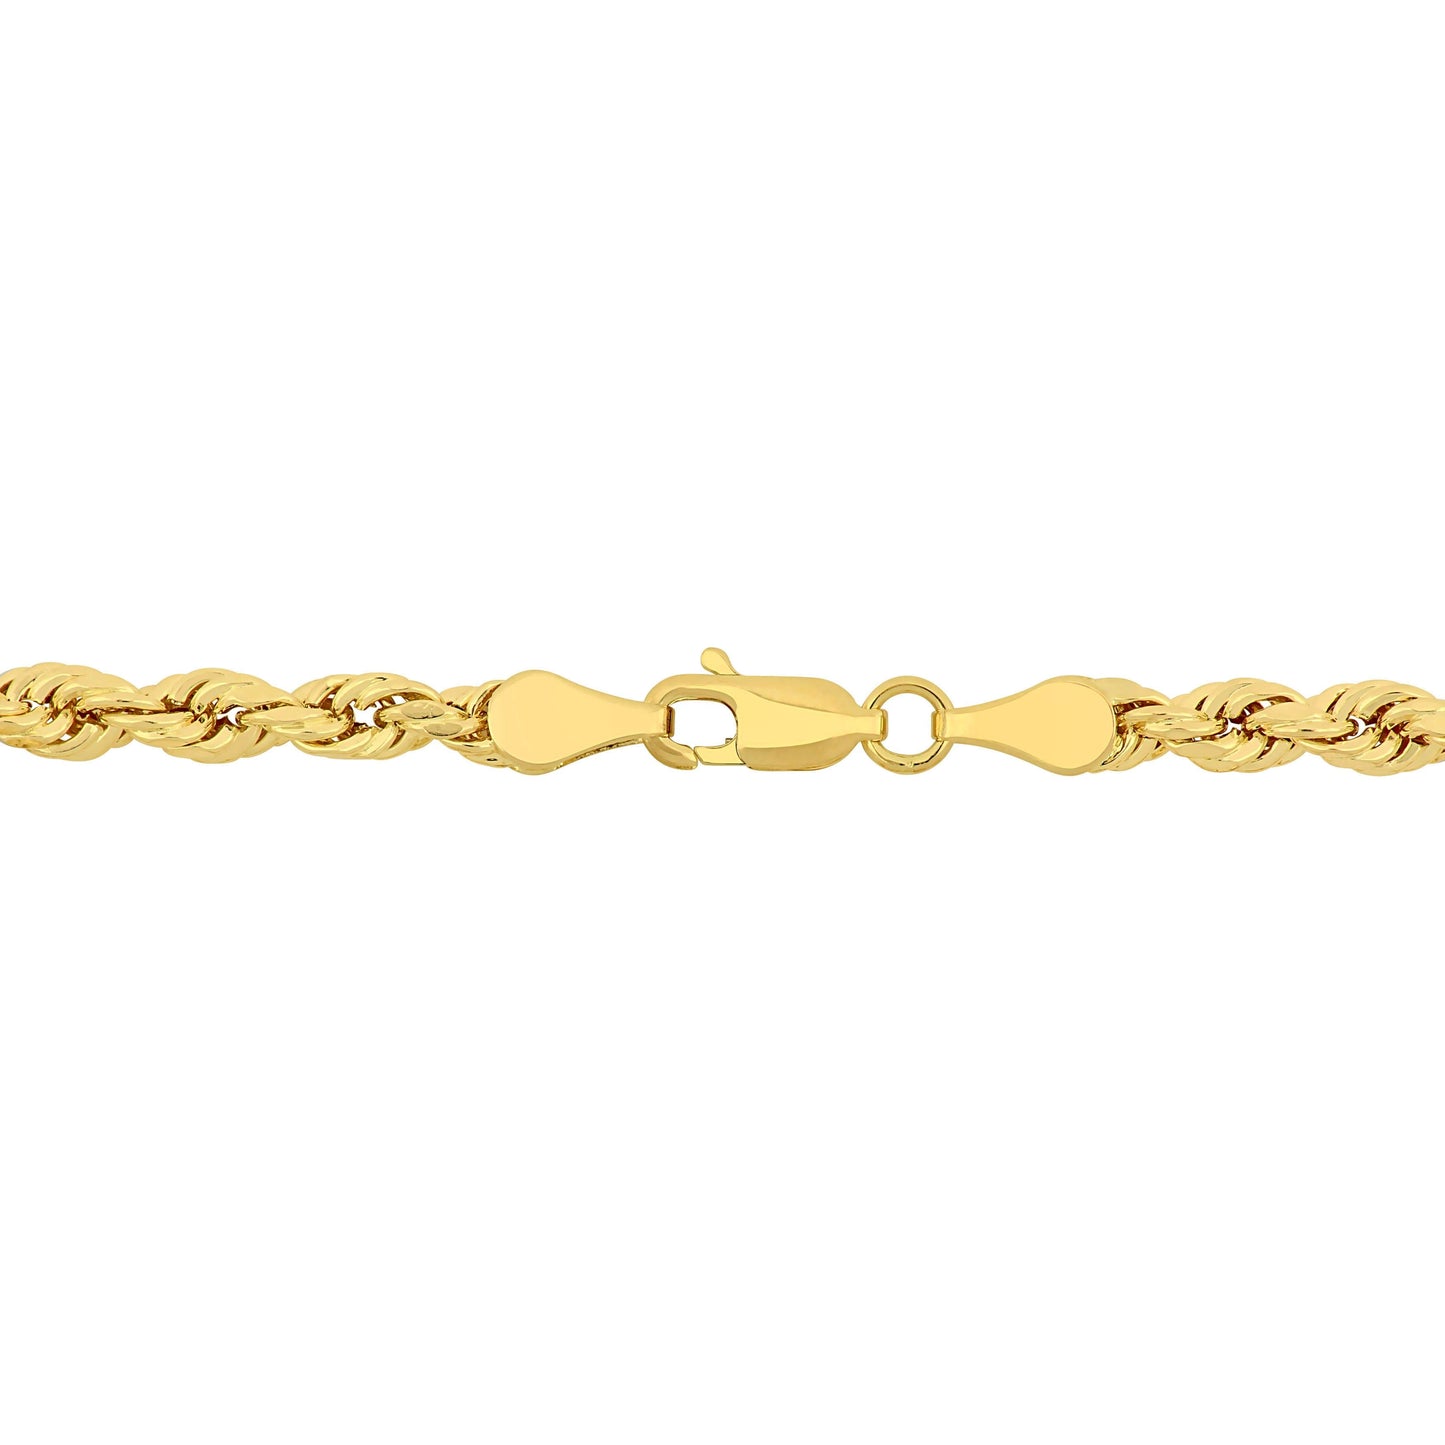 10k Yellow Gold Rope Chain in 4mm